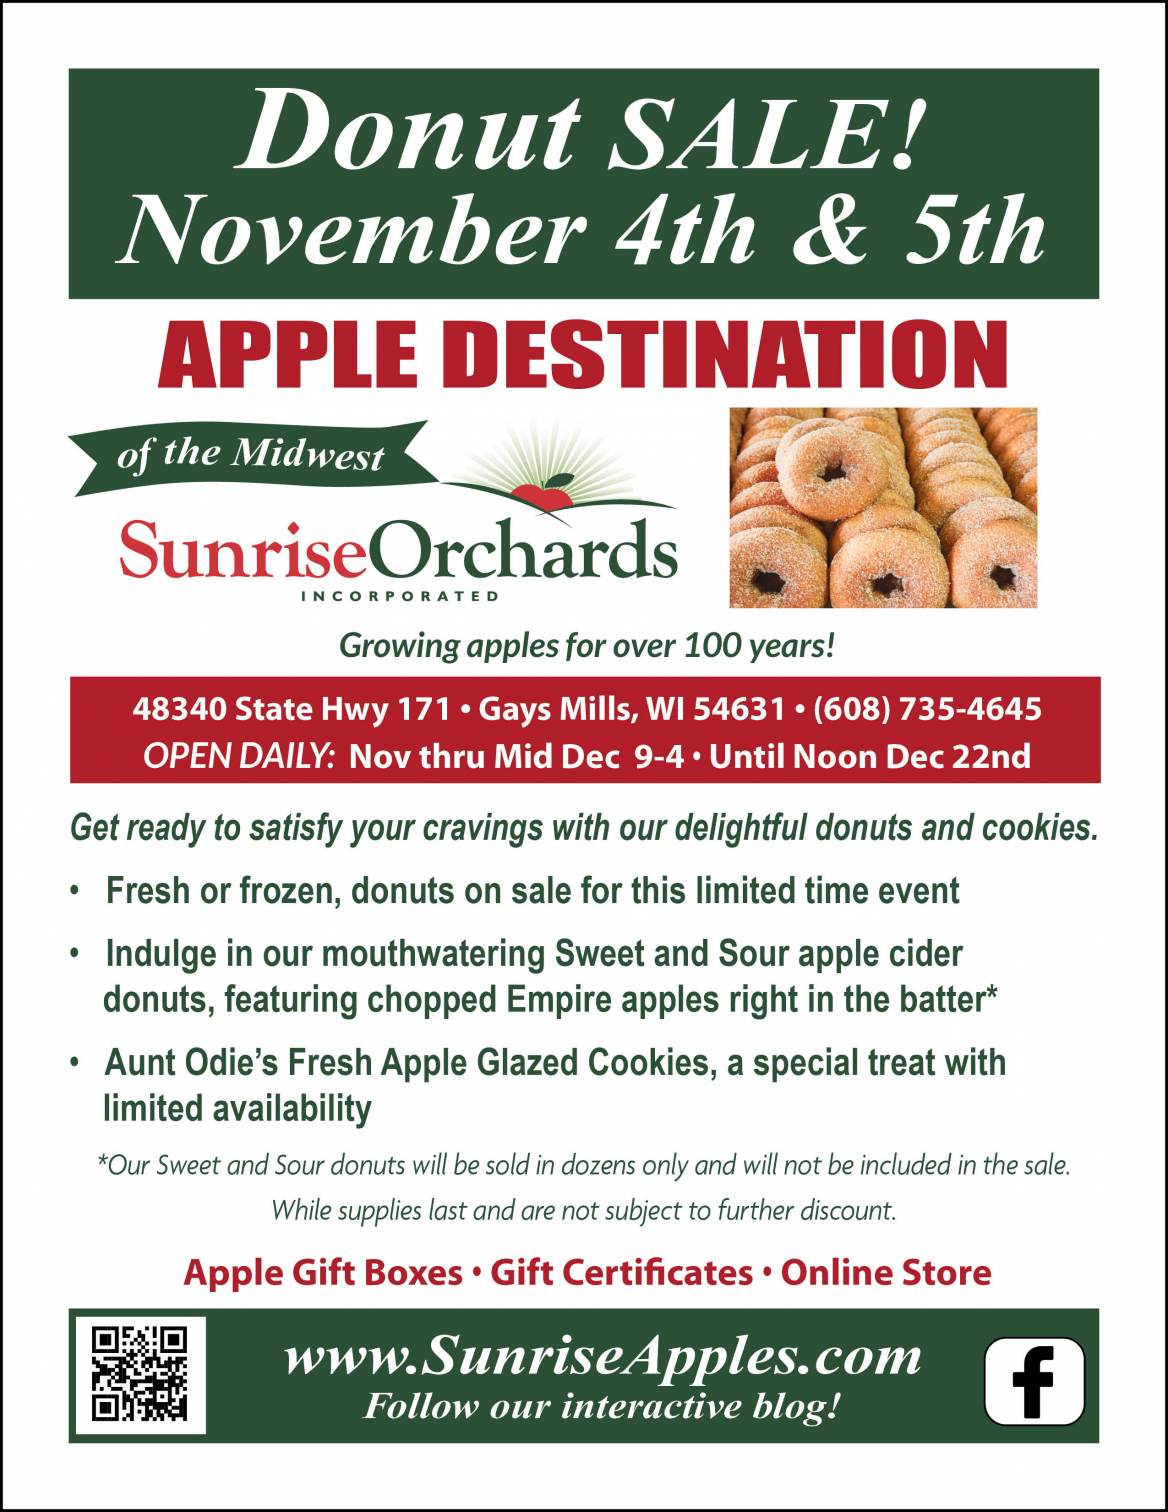 Donut SALE Nov. 4 & 5 + Sweet and Sour Apple Cider Donuts + Aunt Odie's Fresh Apple Glazed Cookies!🎉